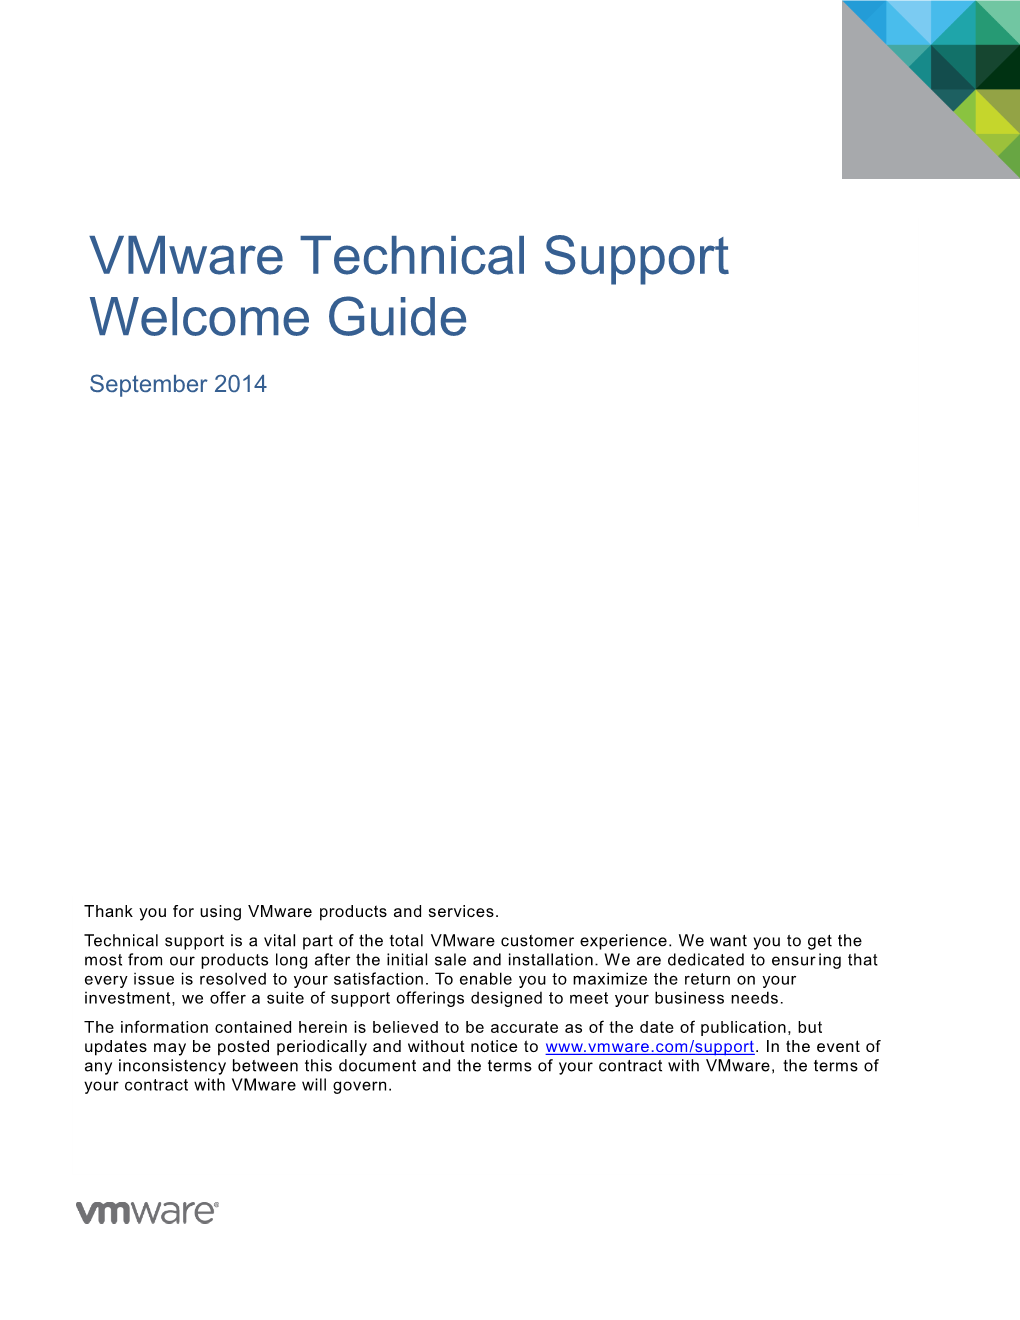 Technical Support Welcome Guide: Vmware, Inc